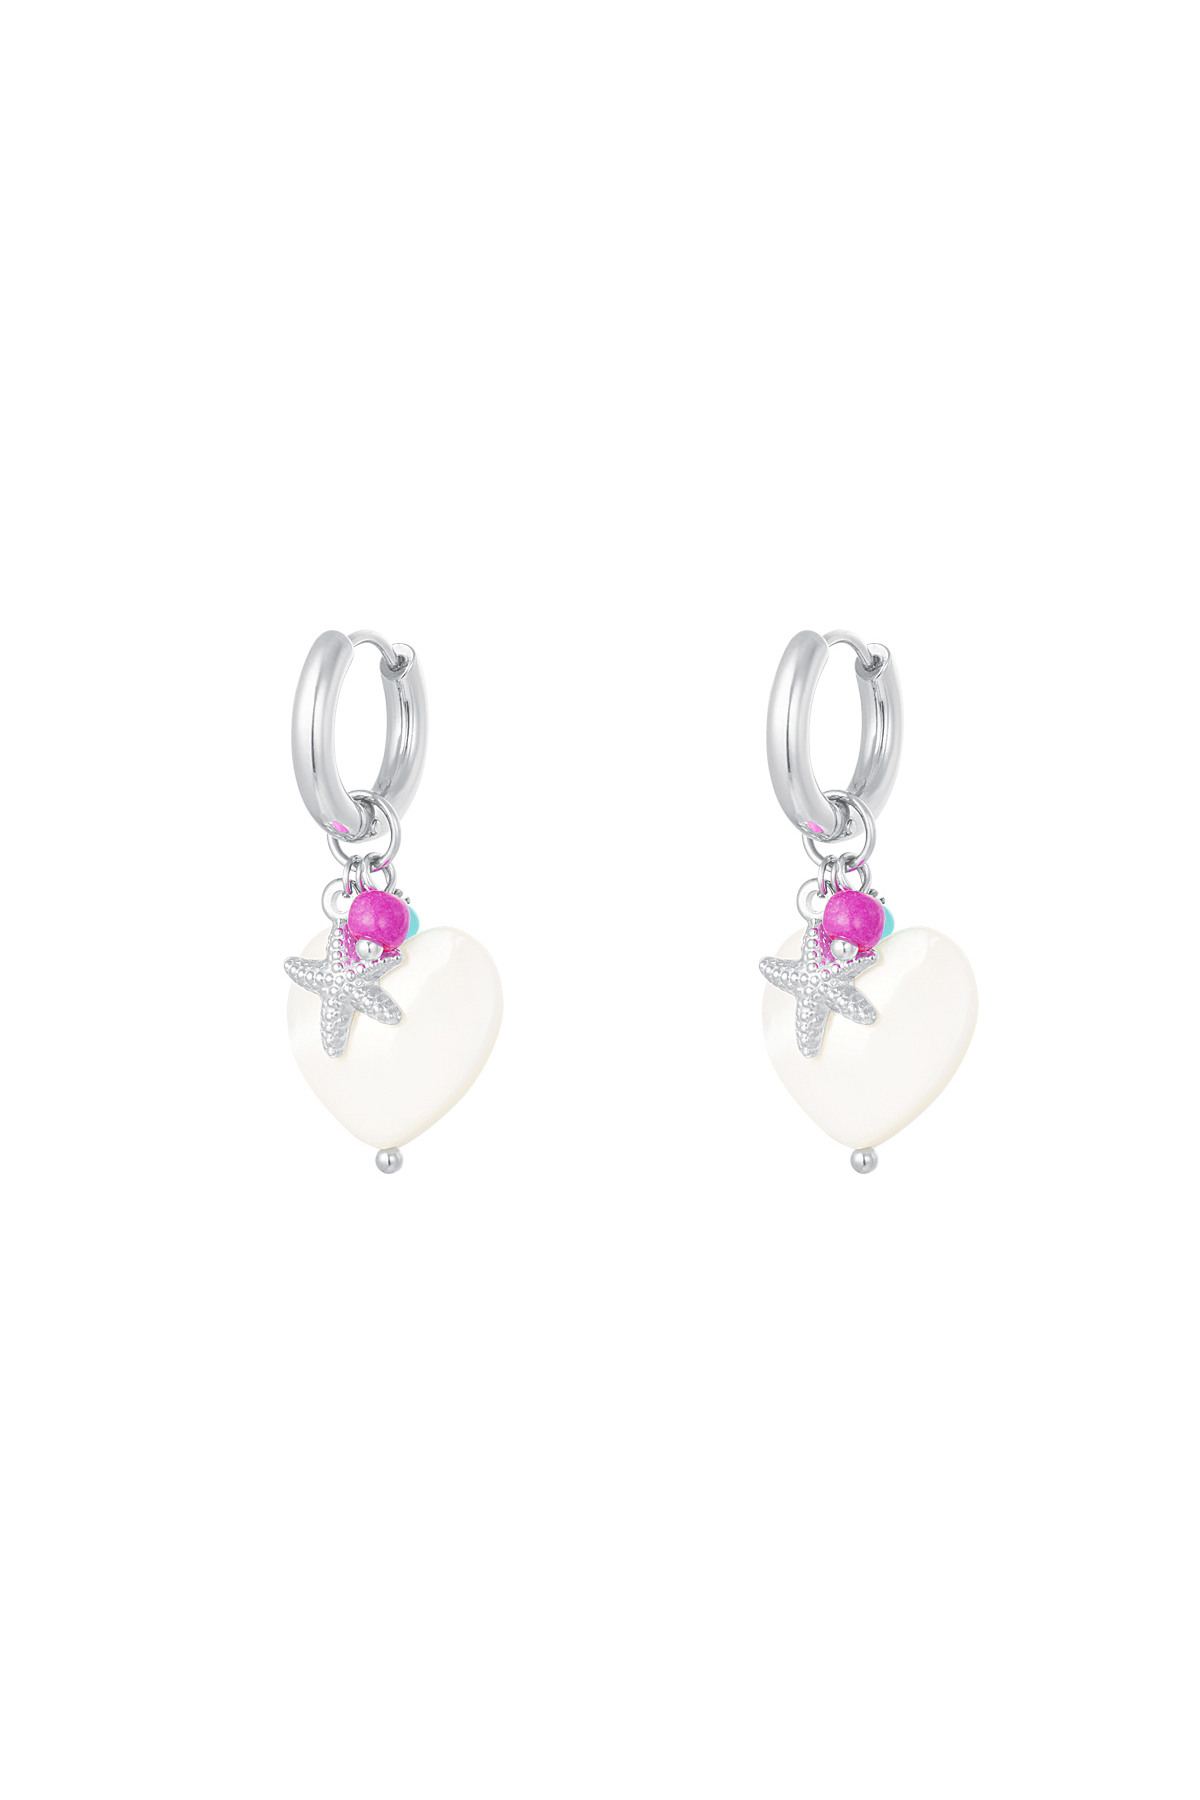 Sea star earrings - Beach collection Silver Stainless Steel h5 